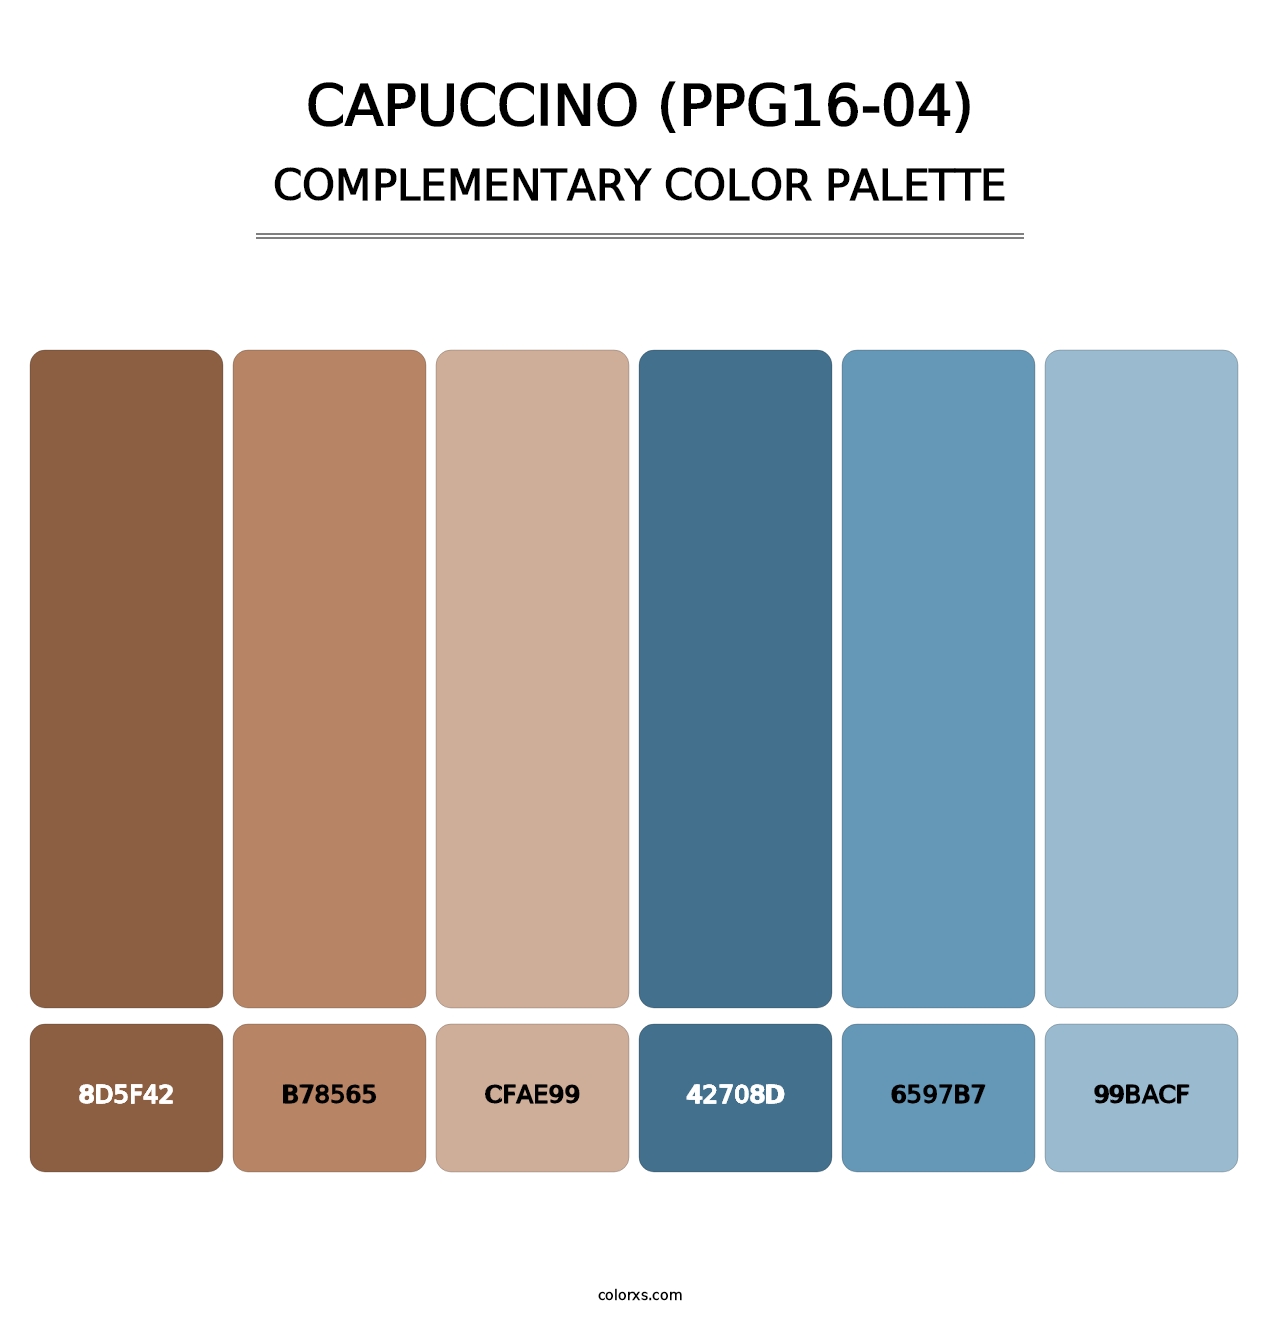 Capuccino (PPG16-04) - Complementary Color Palette